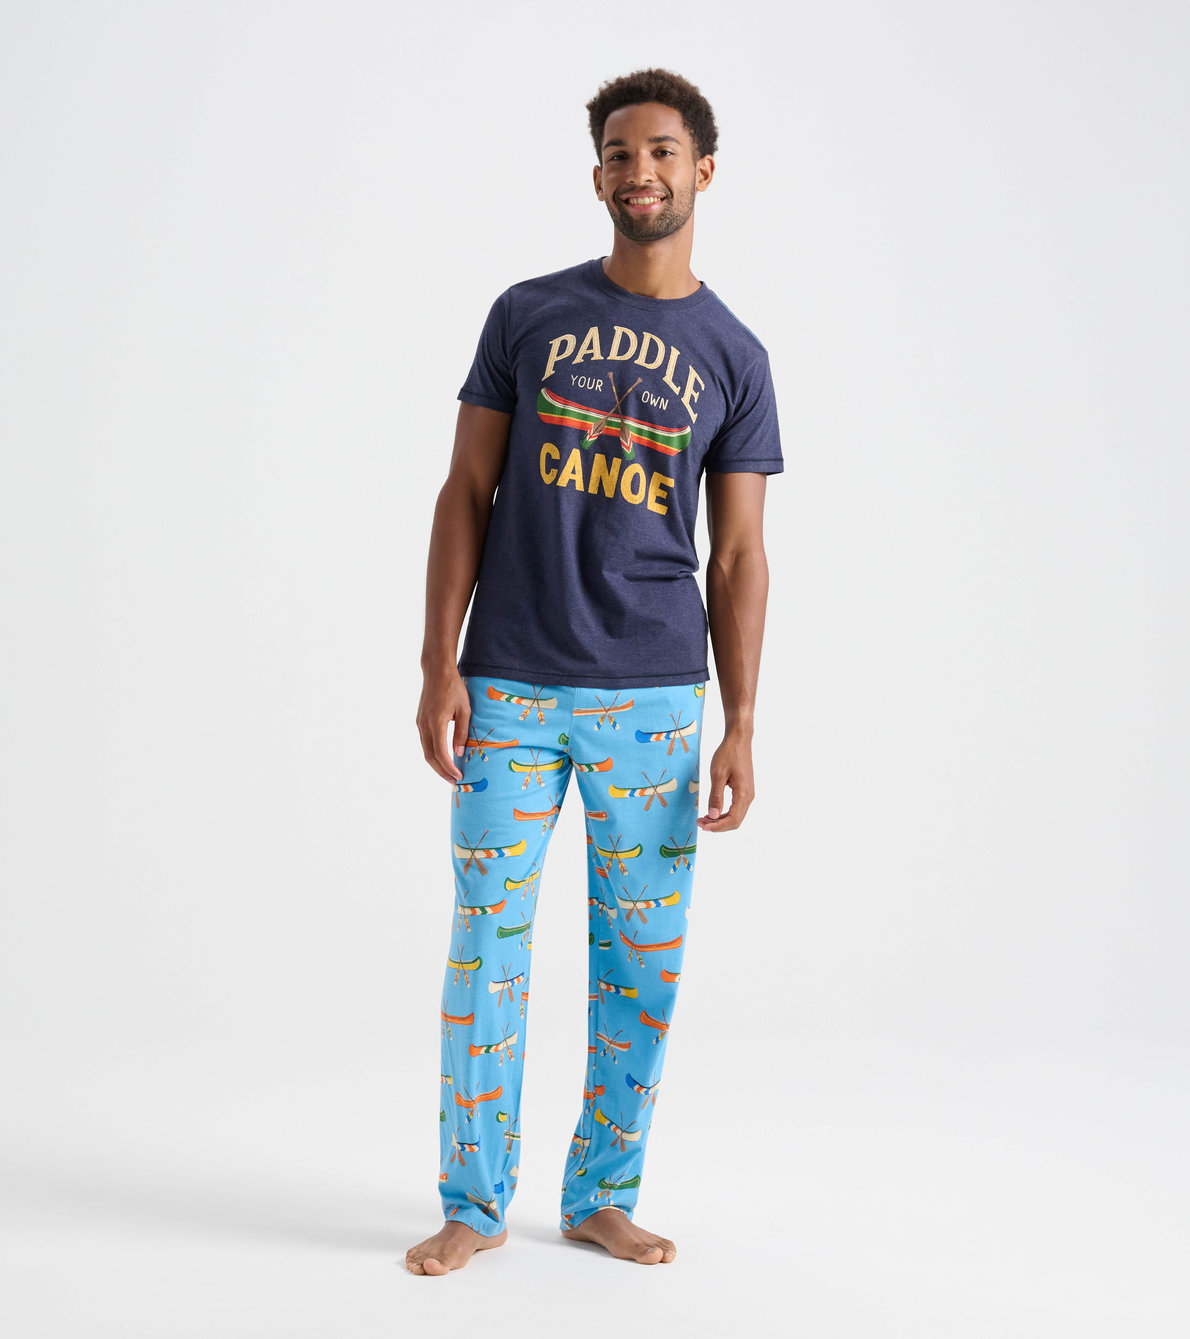 View larger image of Men's Paddle Your Own Canoe T-Shirt and Pants Pajama Separates